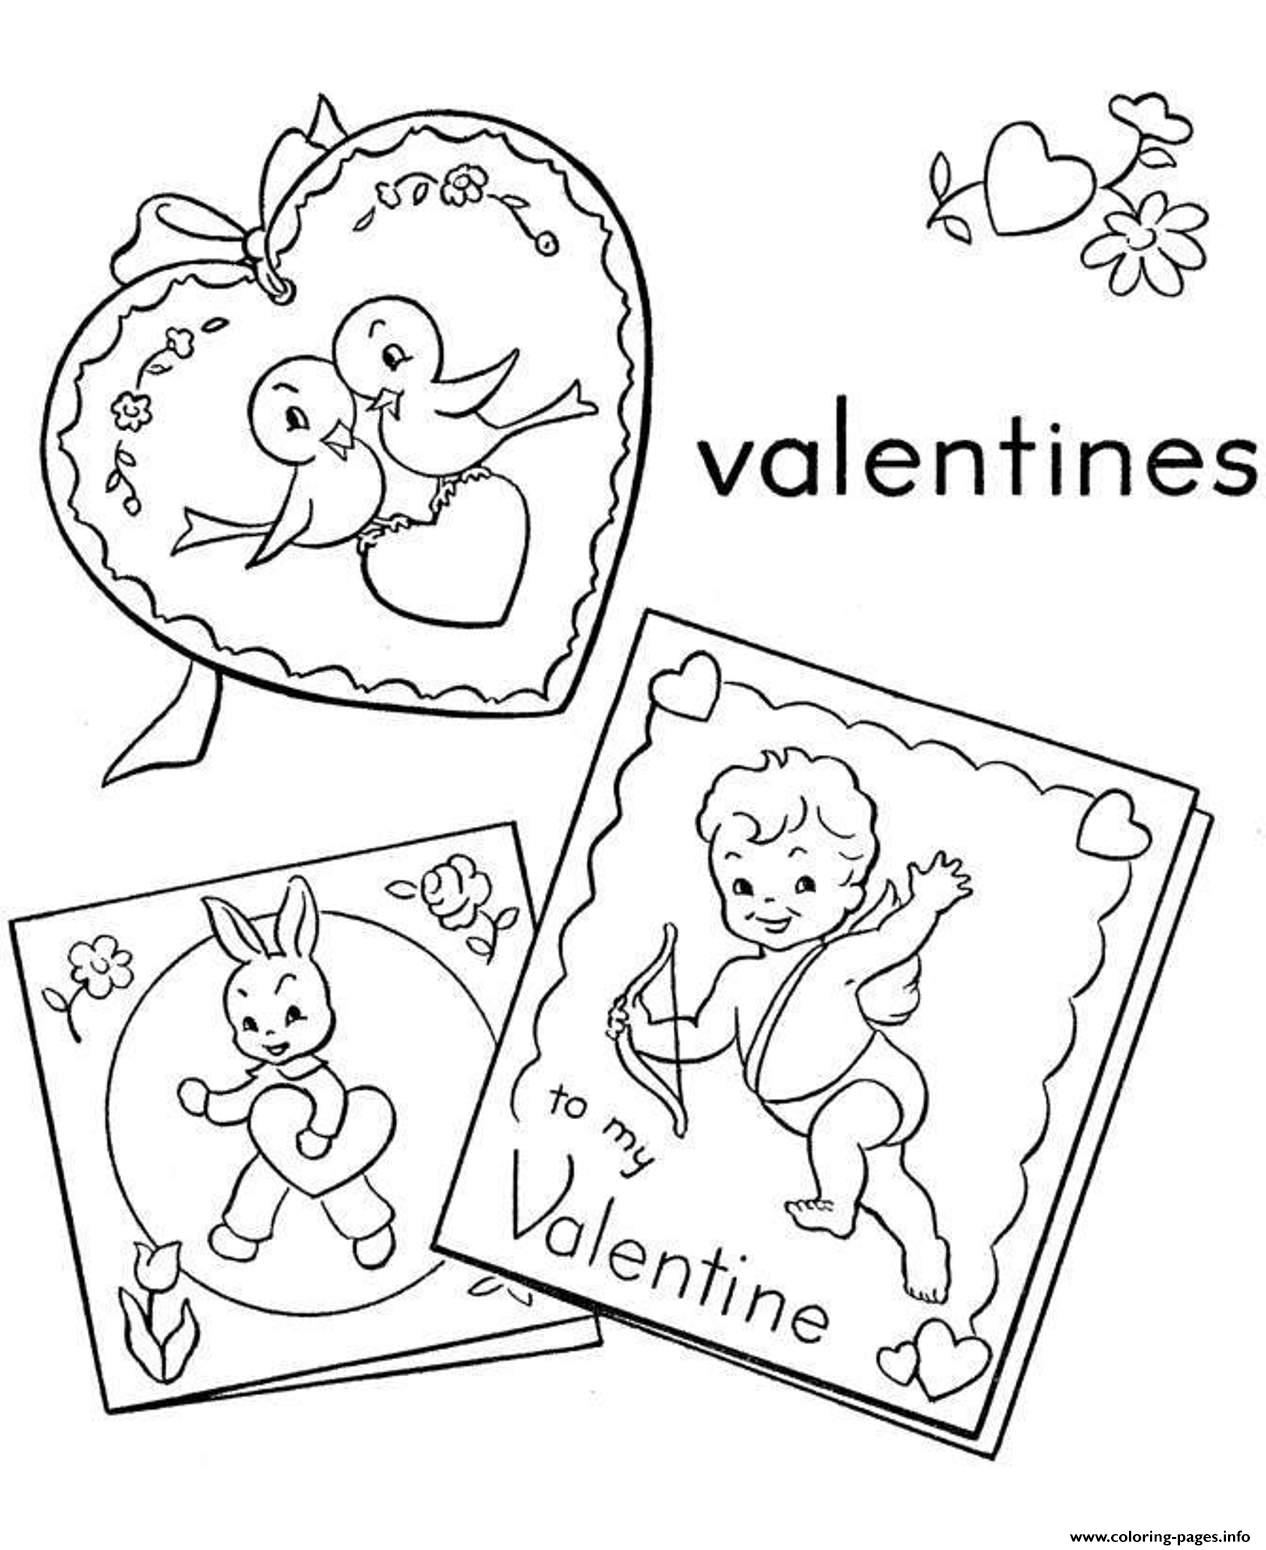 Lovely Valentines Day S496b coloring